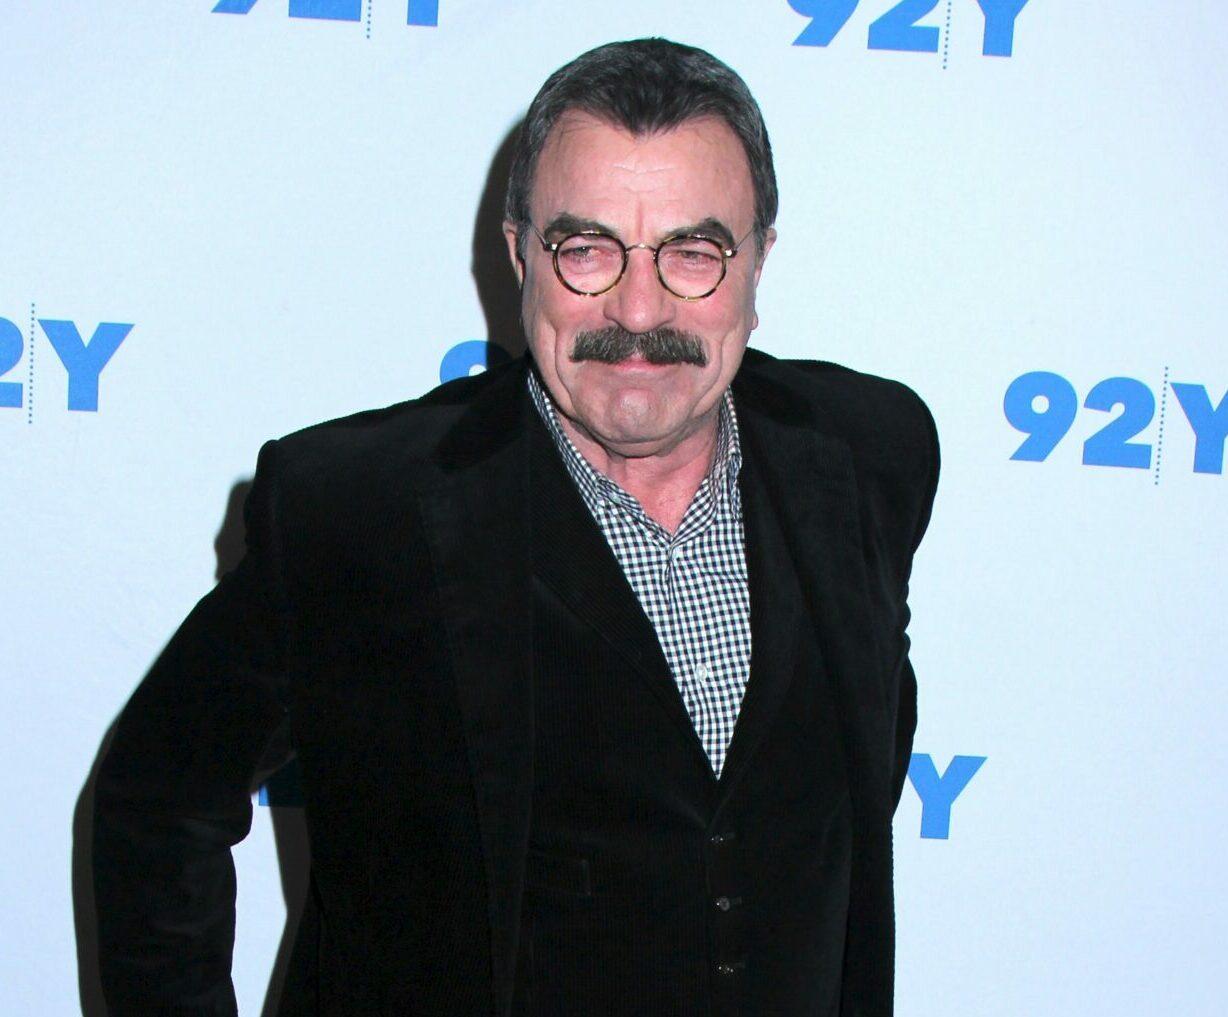 Stars seen attending the 'Blue Bloods' 150th Episode Celebration at 92nd Street Y in New York City, New York. 27 Mar 2017 Pictured: Tom Selleck.